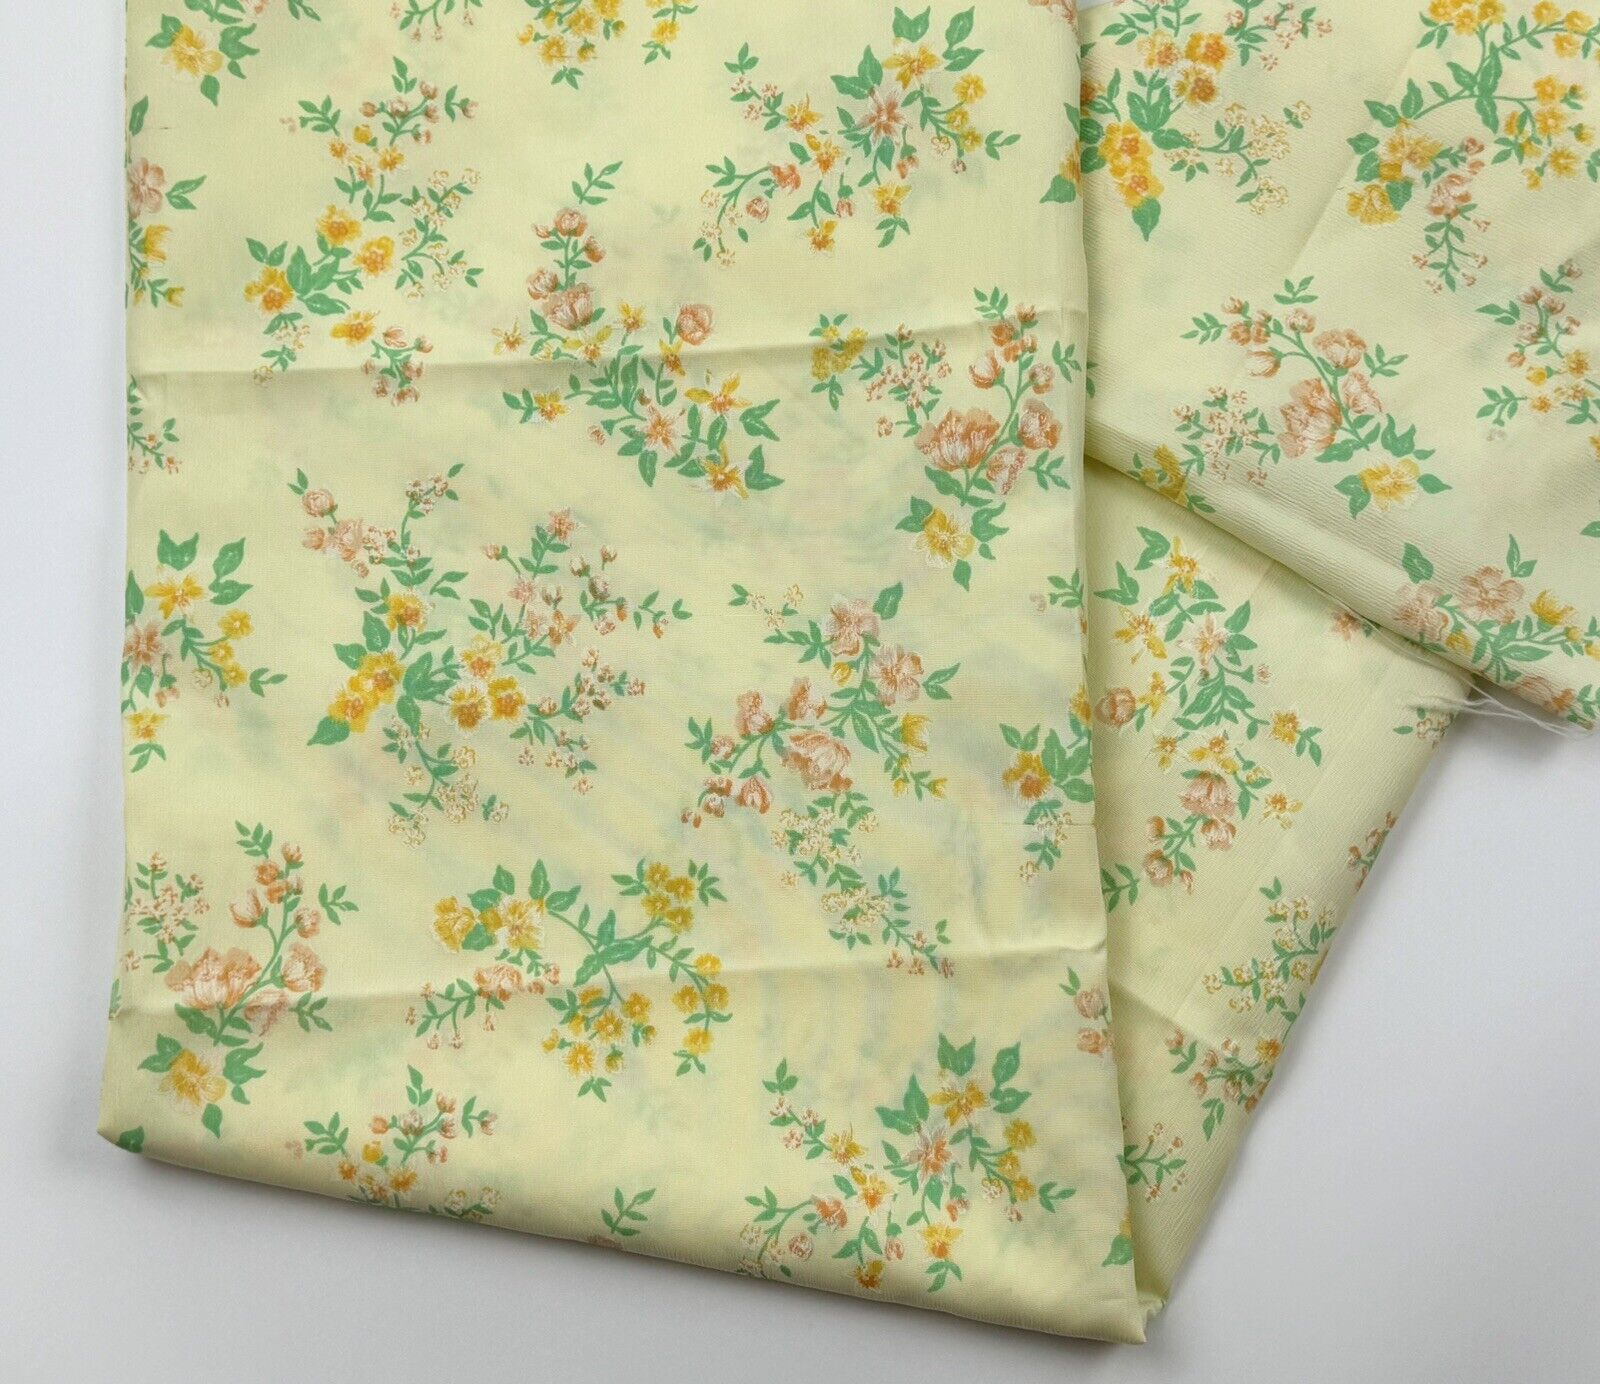 Vtg Textured Poly Fabric Lightweight Yellow Floral 4+ Yards 2 Panels Cottage